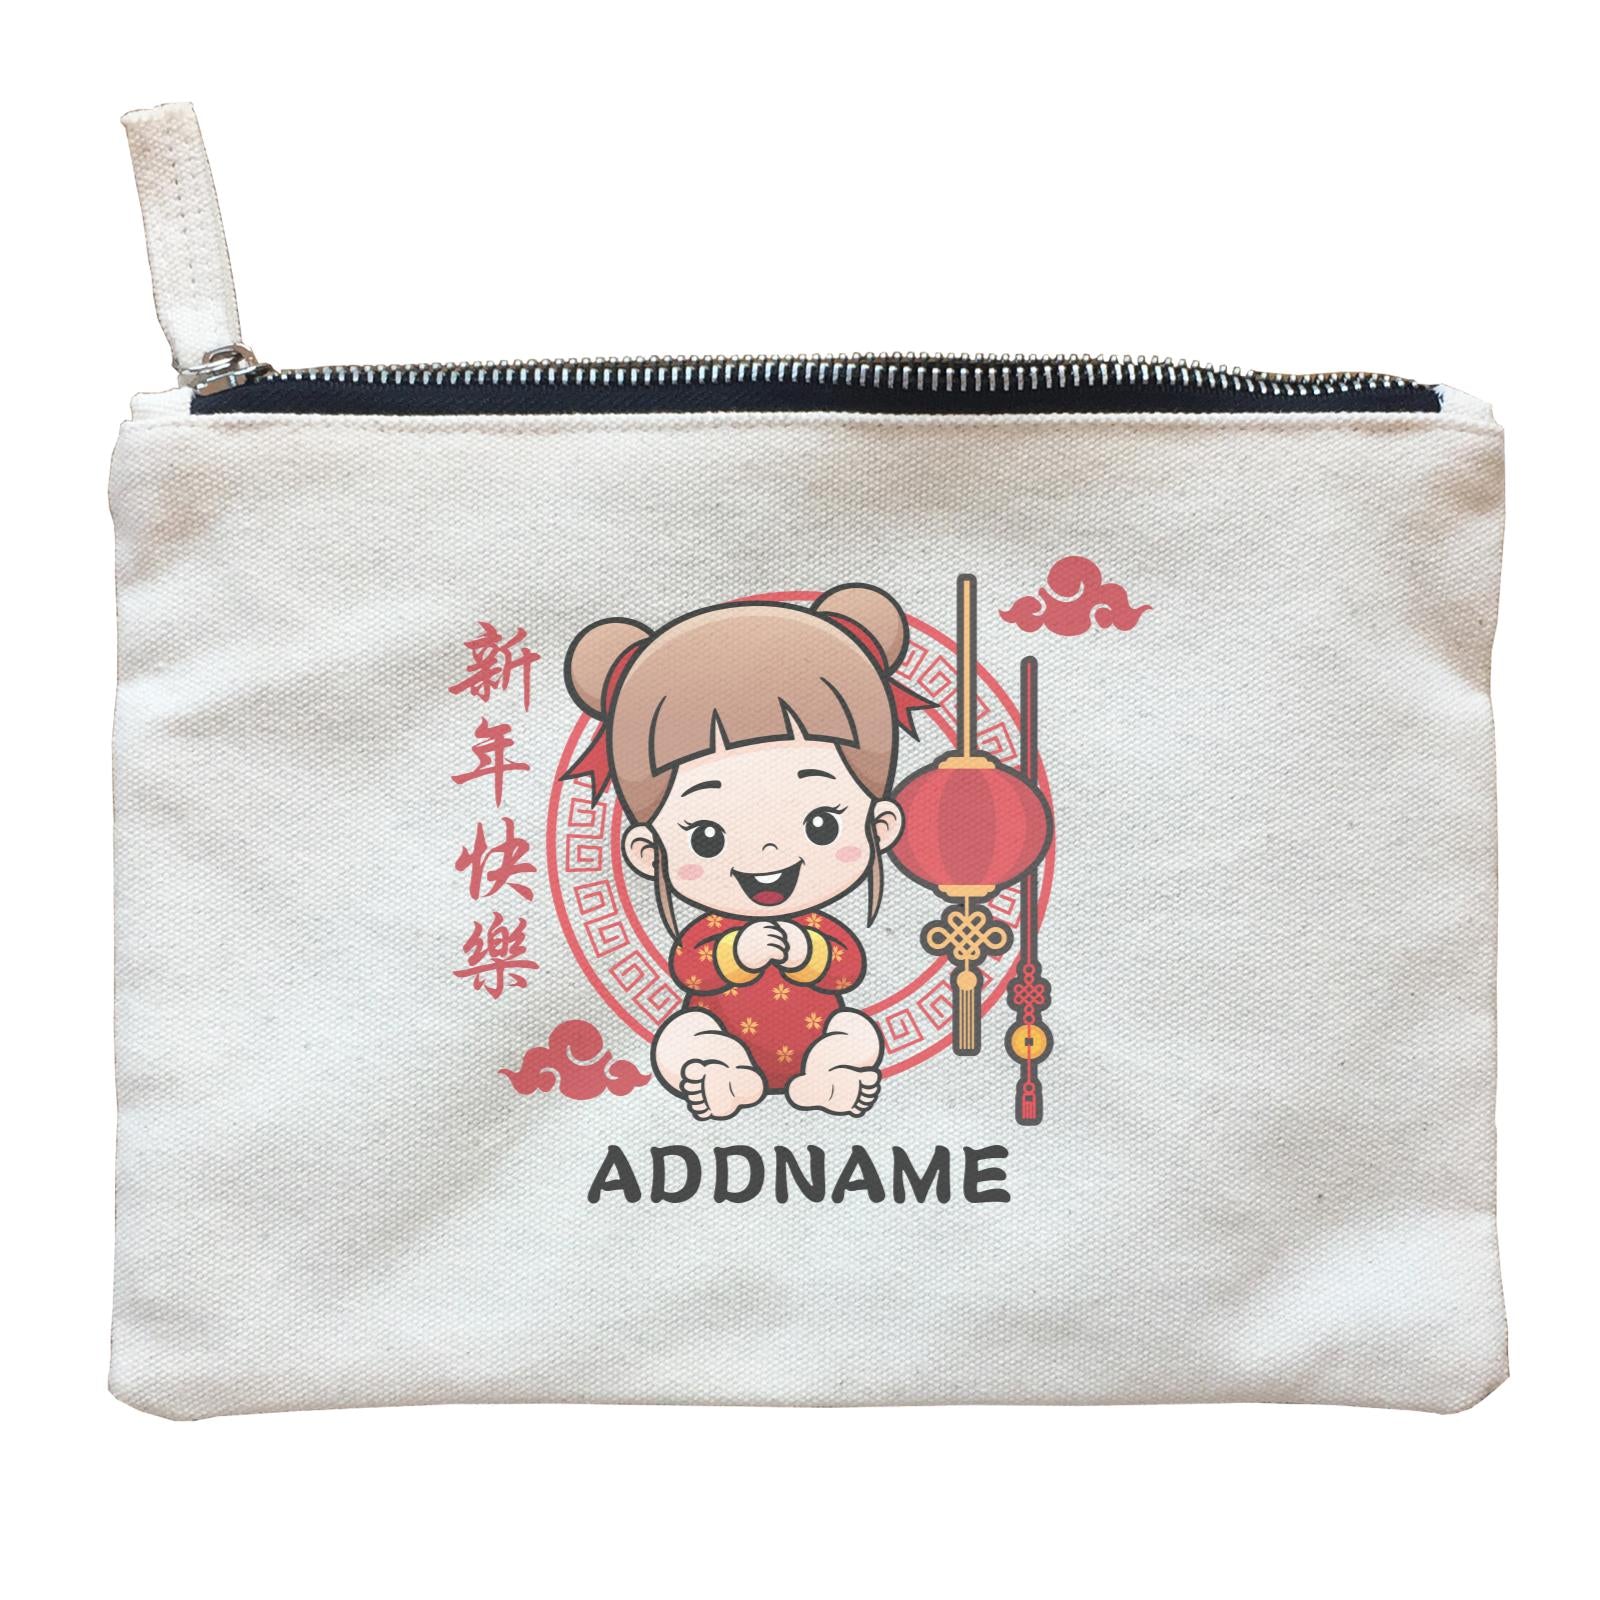 Chinese New Year Fancy Baby Girl with Lantern Zipper Pouch